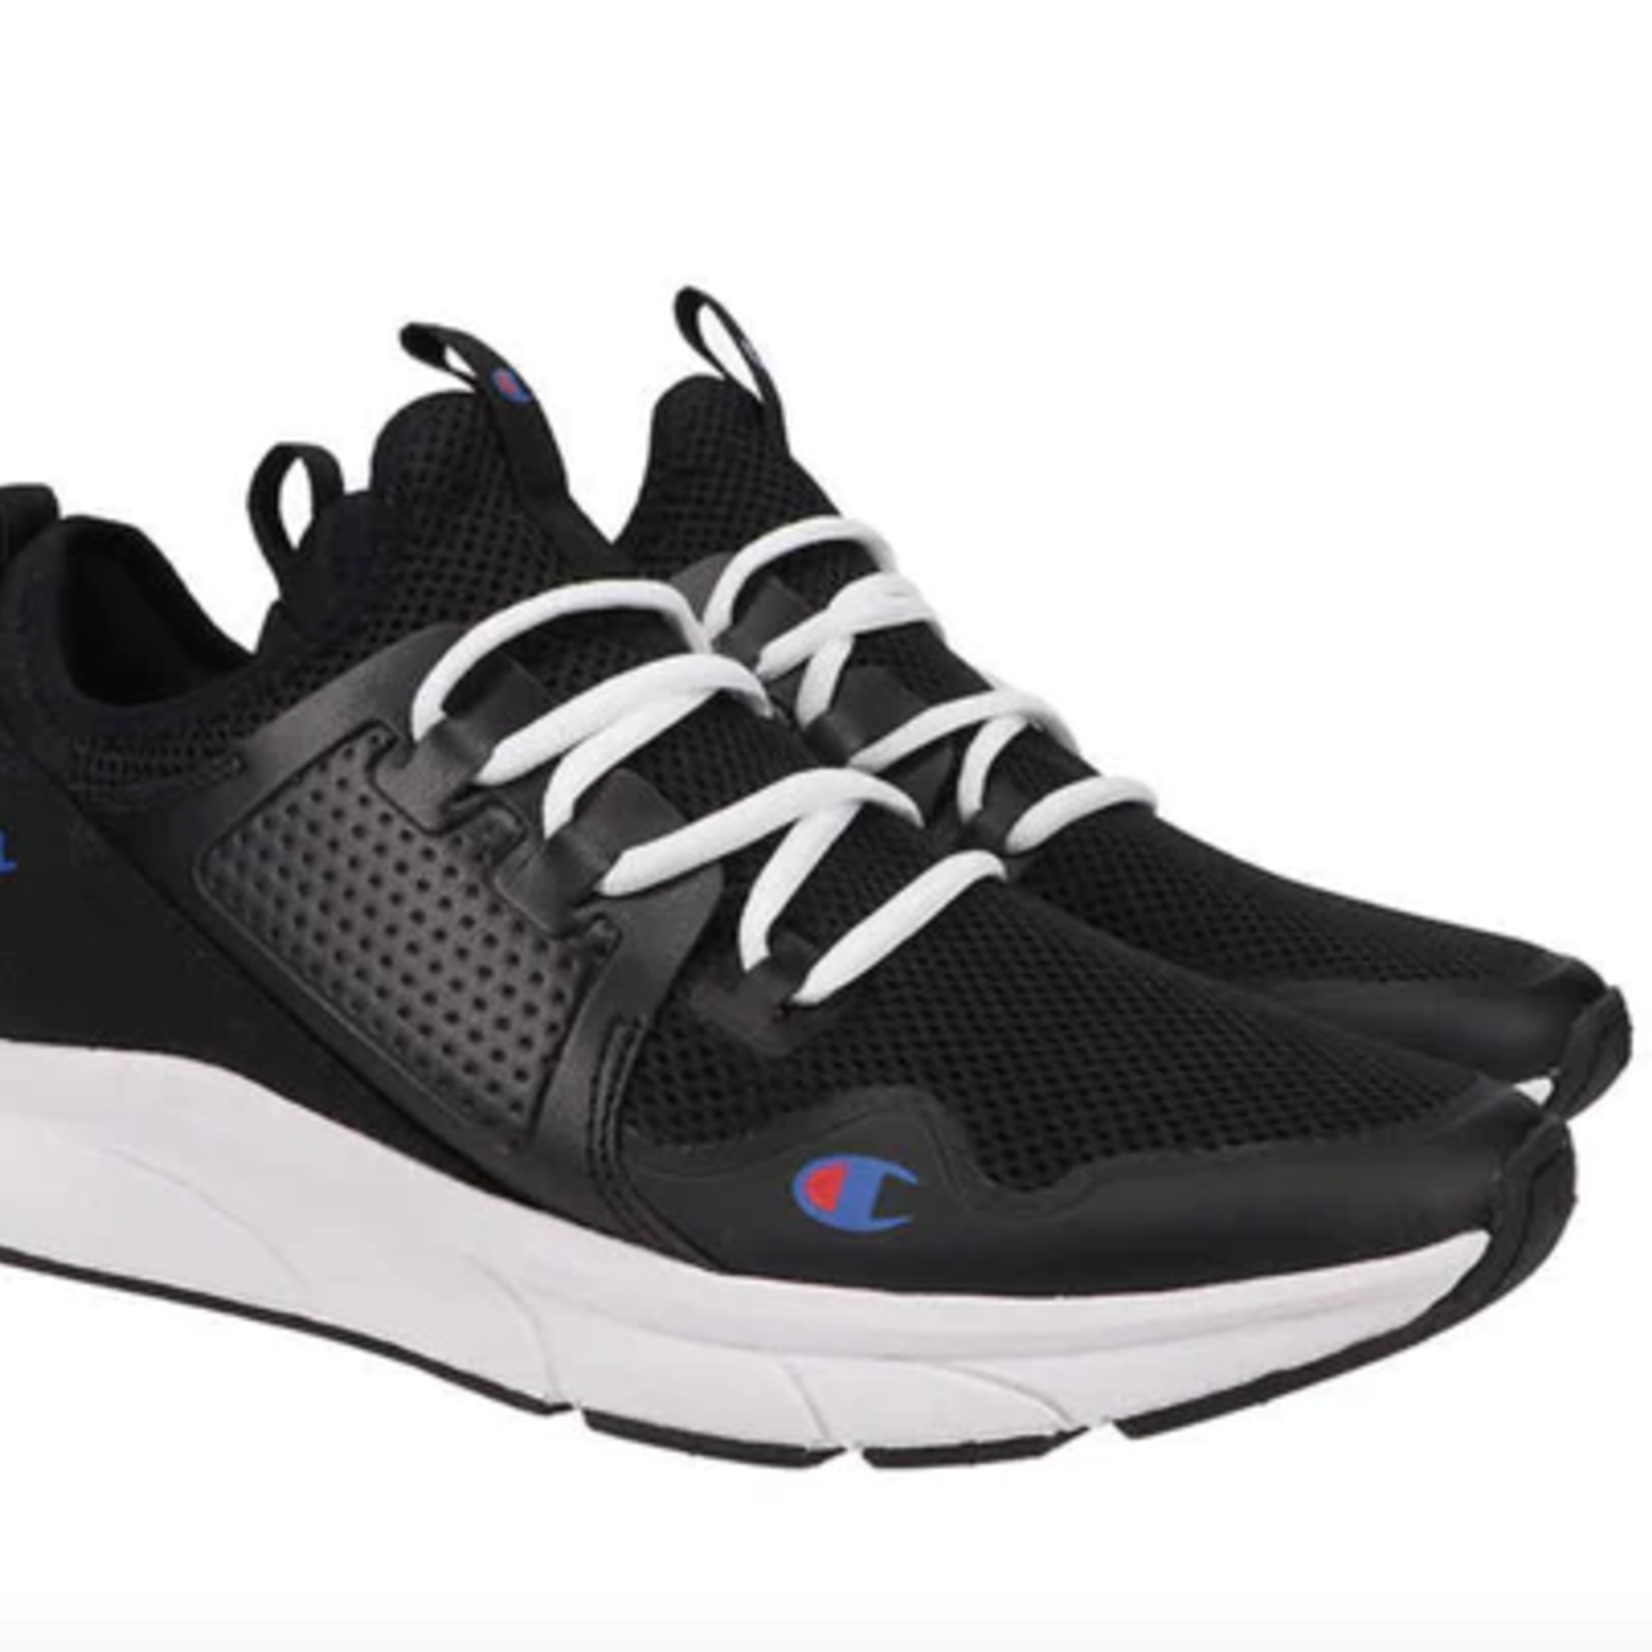 CHAMPION FLARE MEN'S RUNNERS -BLUE OR BLACK SIZE 10